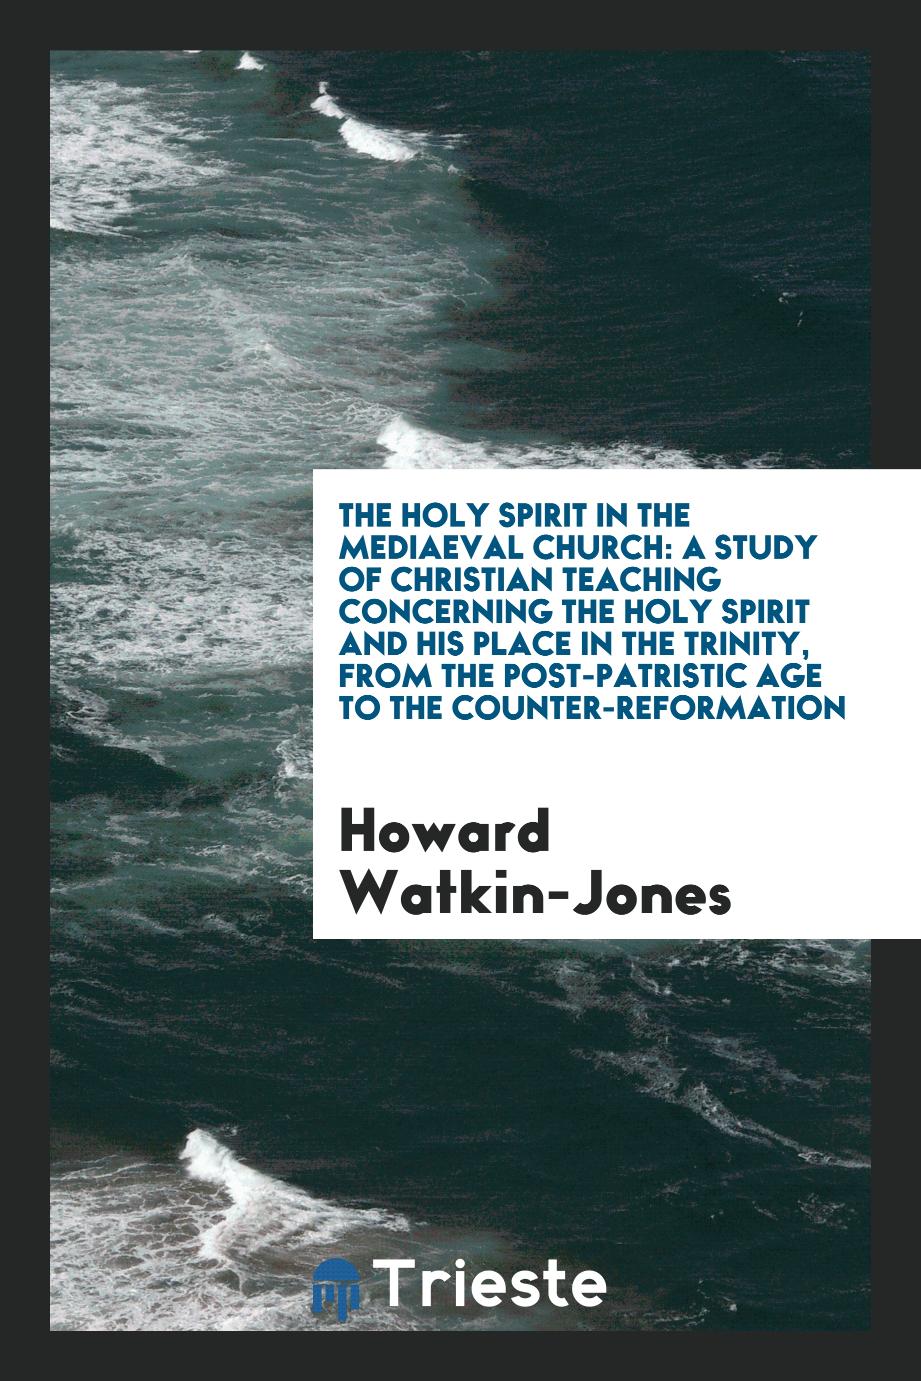 The Holy Spirit in the Mediaeval Church: A Study of Christian Teaching Concerning the Holy Spirit and His Place in the Trinity, from the Post-Patristic Age to the Counter-Reformation